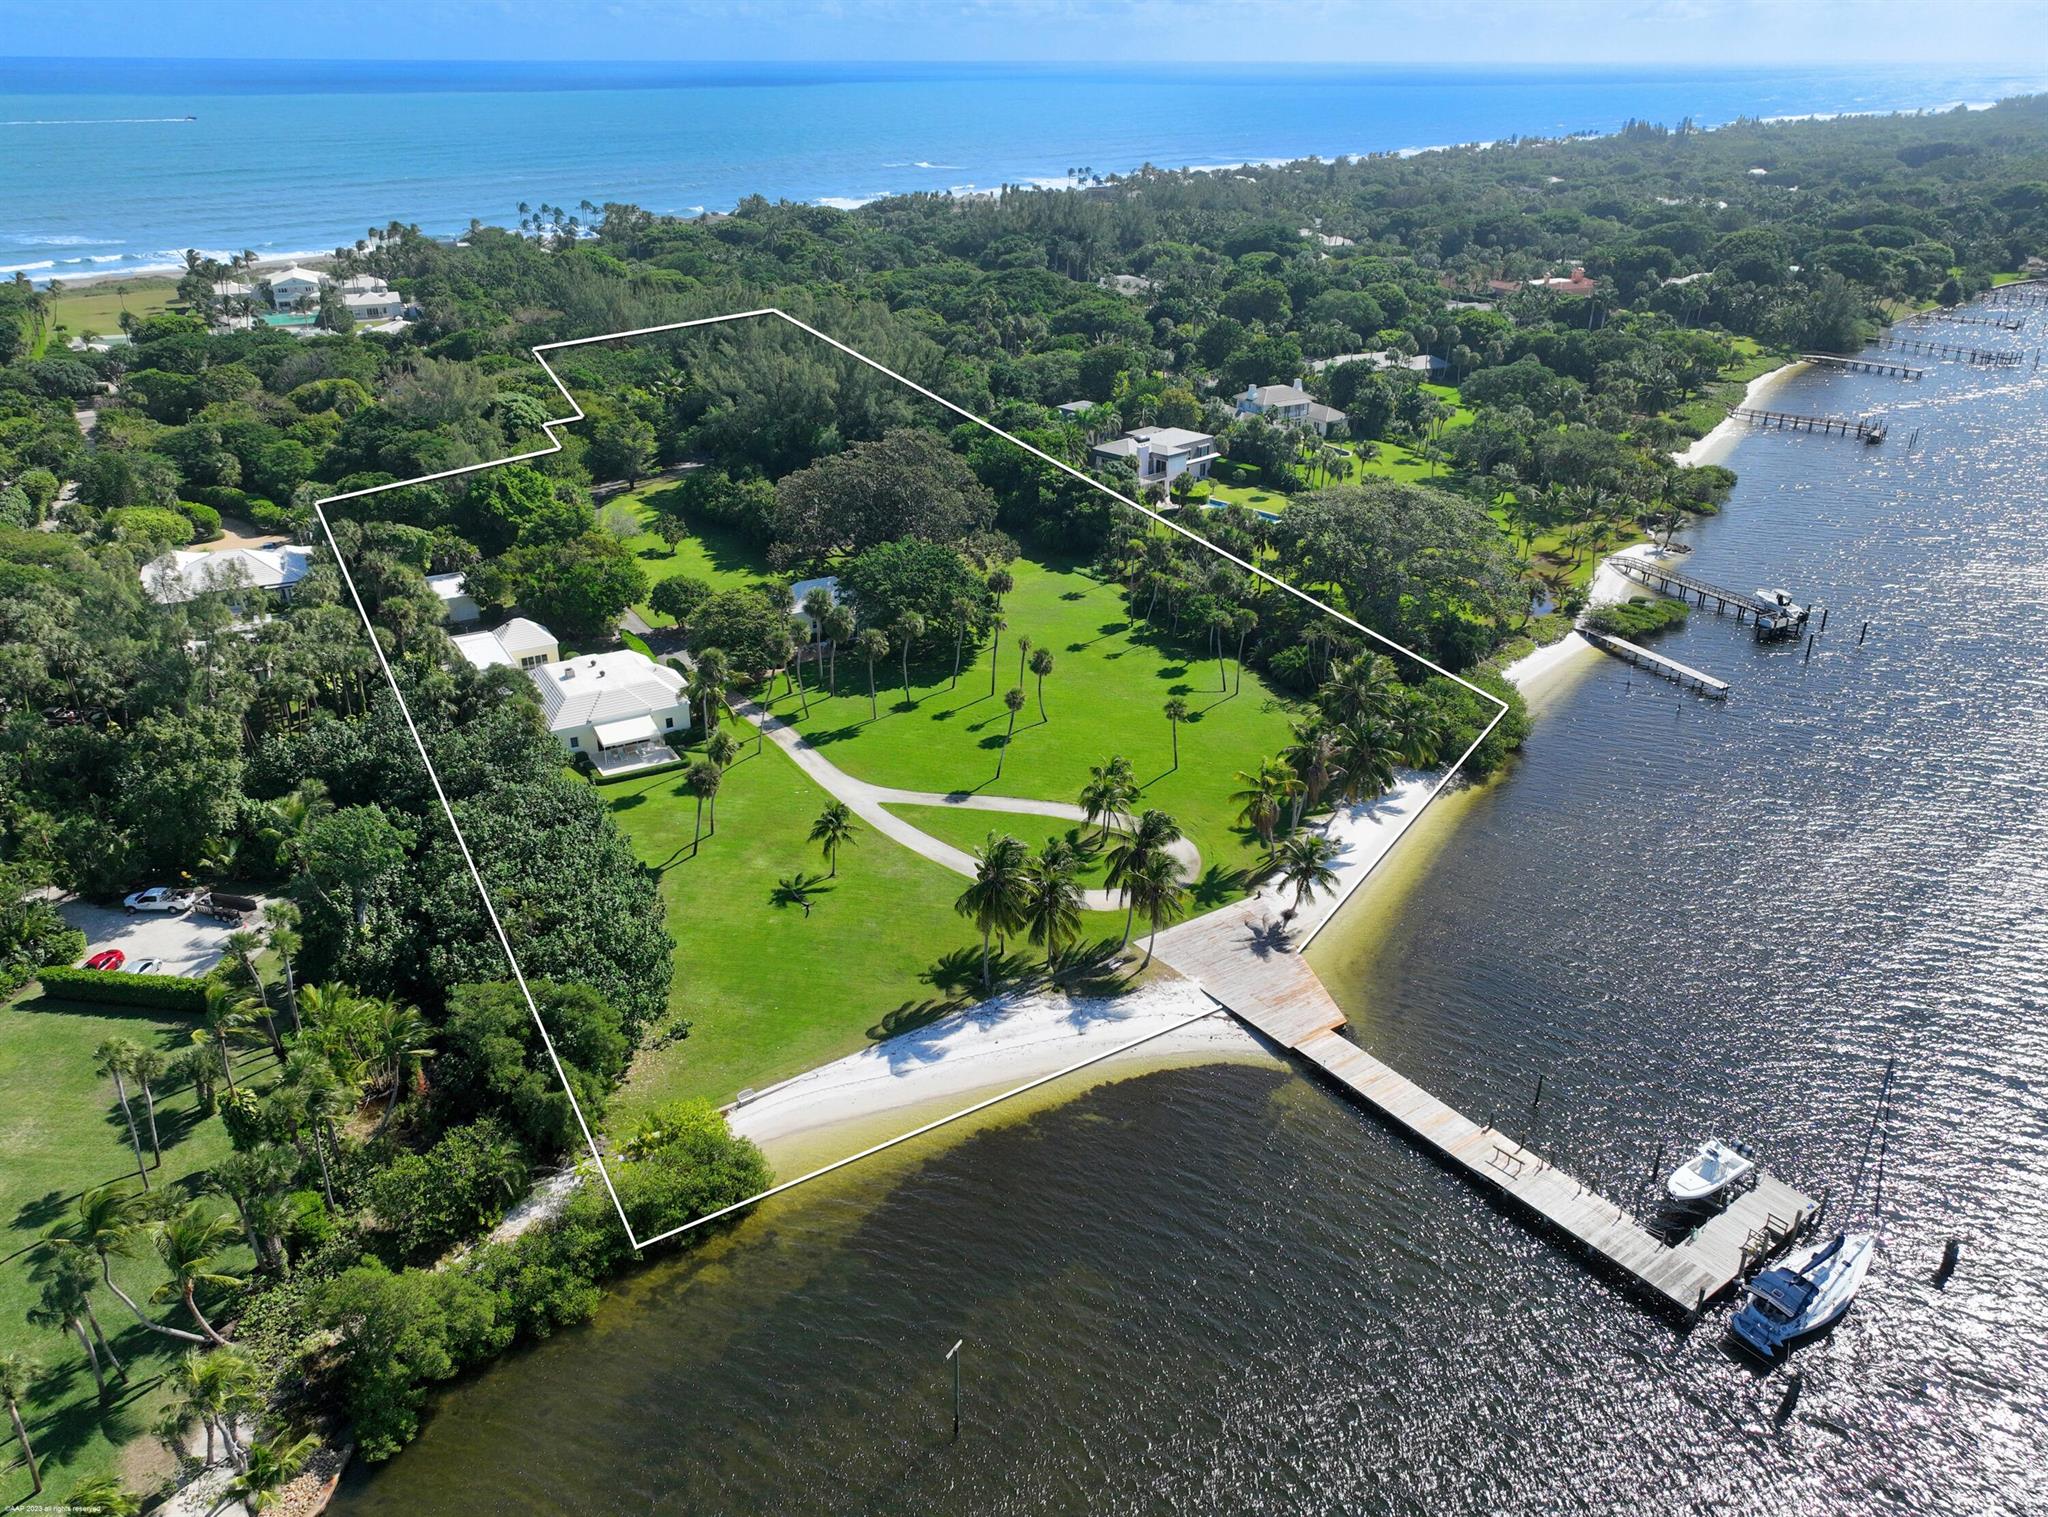 This is a rare opportunity to own one of the premier Intracoastal properties on Jupiter Island. 216 S Beach Rd. encompasses 6.3 acres of prime Jupiter Island land with 338 feet of DIRECT INTRACOASTAL FRONTAGE WITH VIEWS ACROSS TO THE PRESERVE. The maximum allowable floor area of 20,000SQ. FT, would cover a large main house and two additional accessory buildings for living quarters. A large deep water dock with adjacent deck provides ample space for multiple boats, kayaks, wave runners and paddle boards. The perfect private family retreat with wide water unobstructed views.